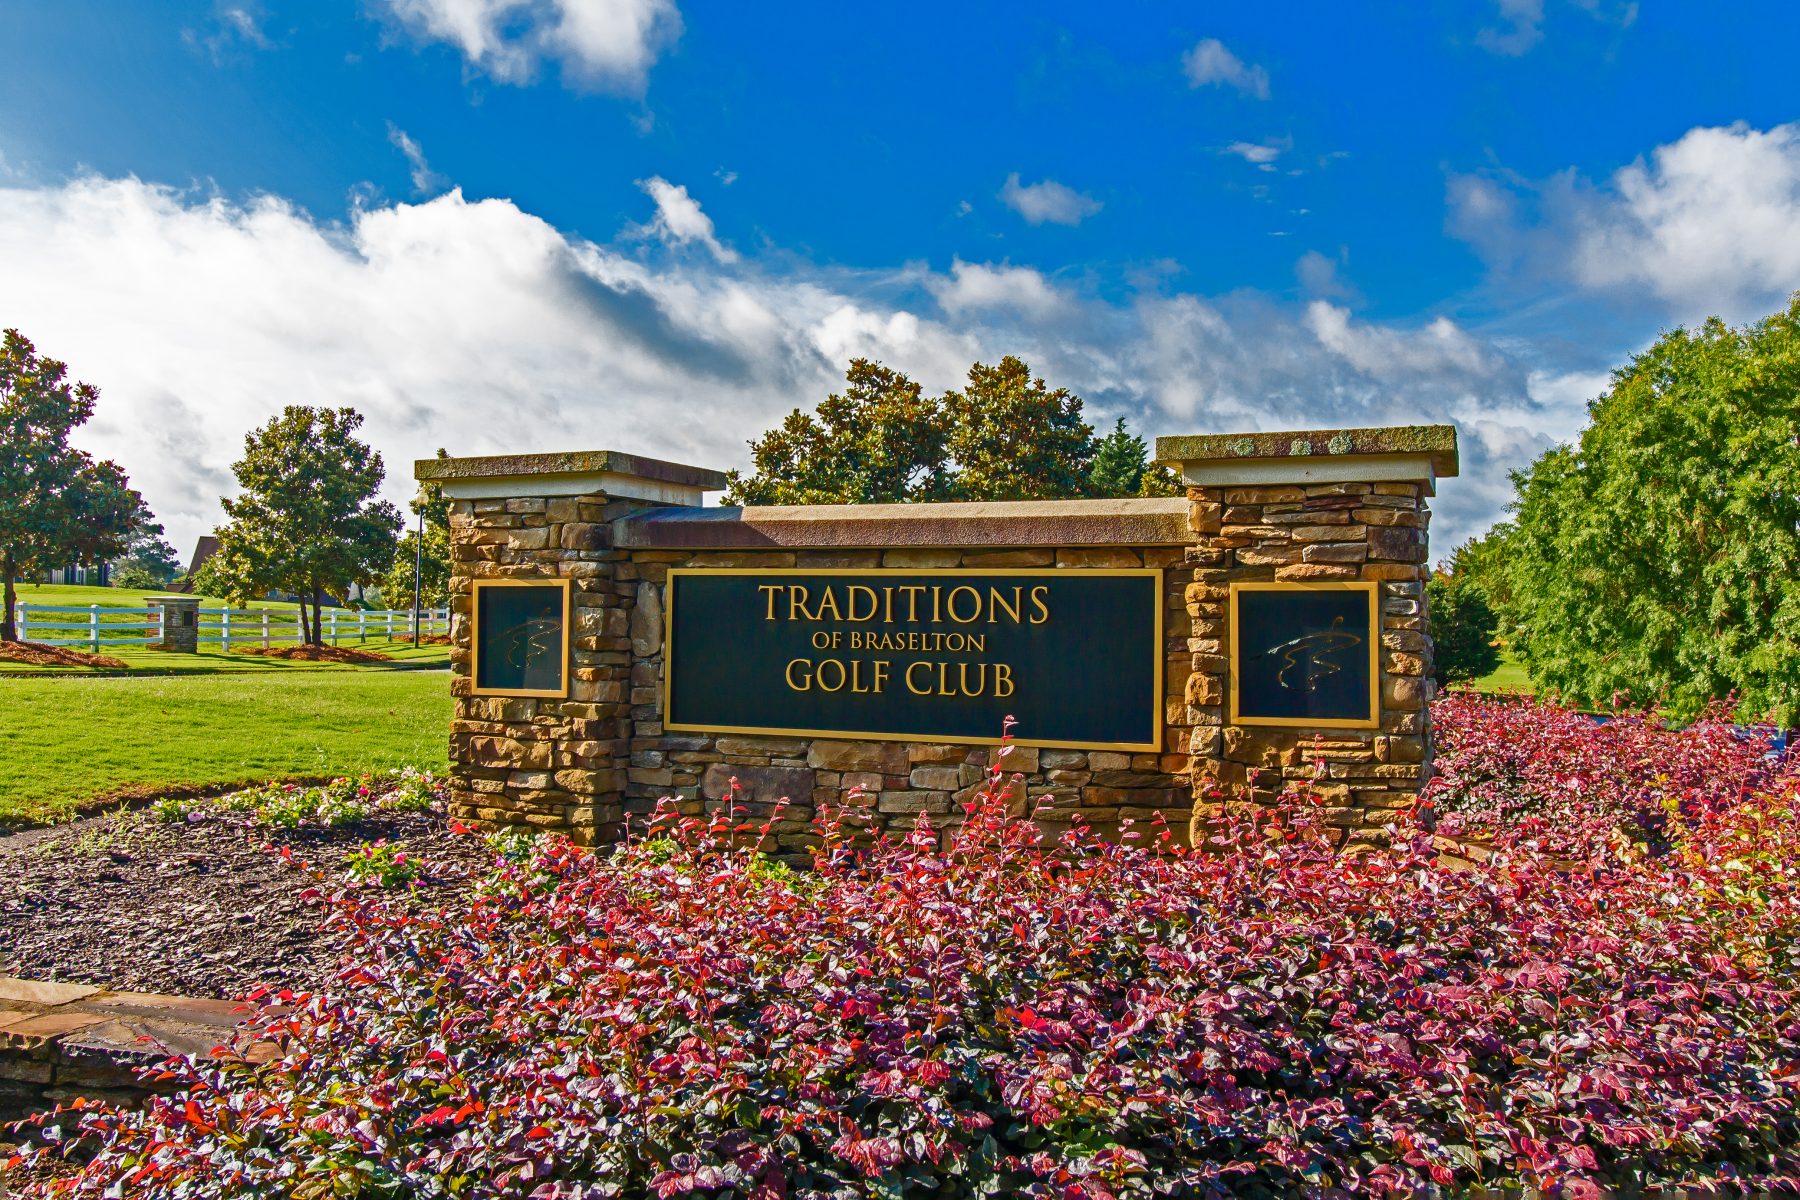 The Links community has 6 floor plans available in Traditions of Braselton